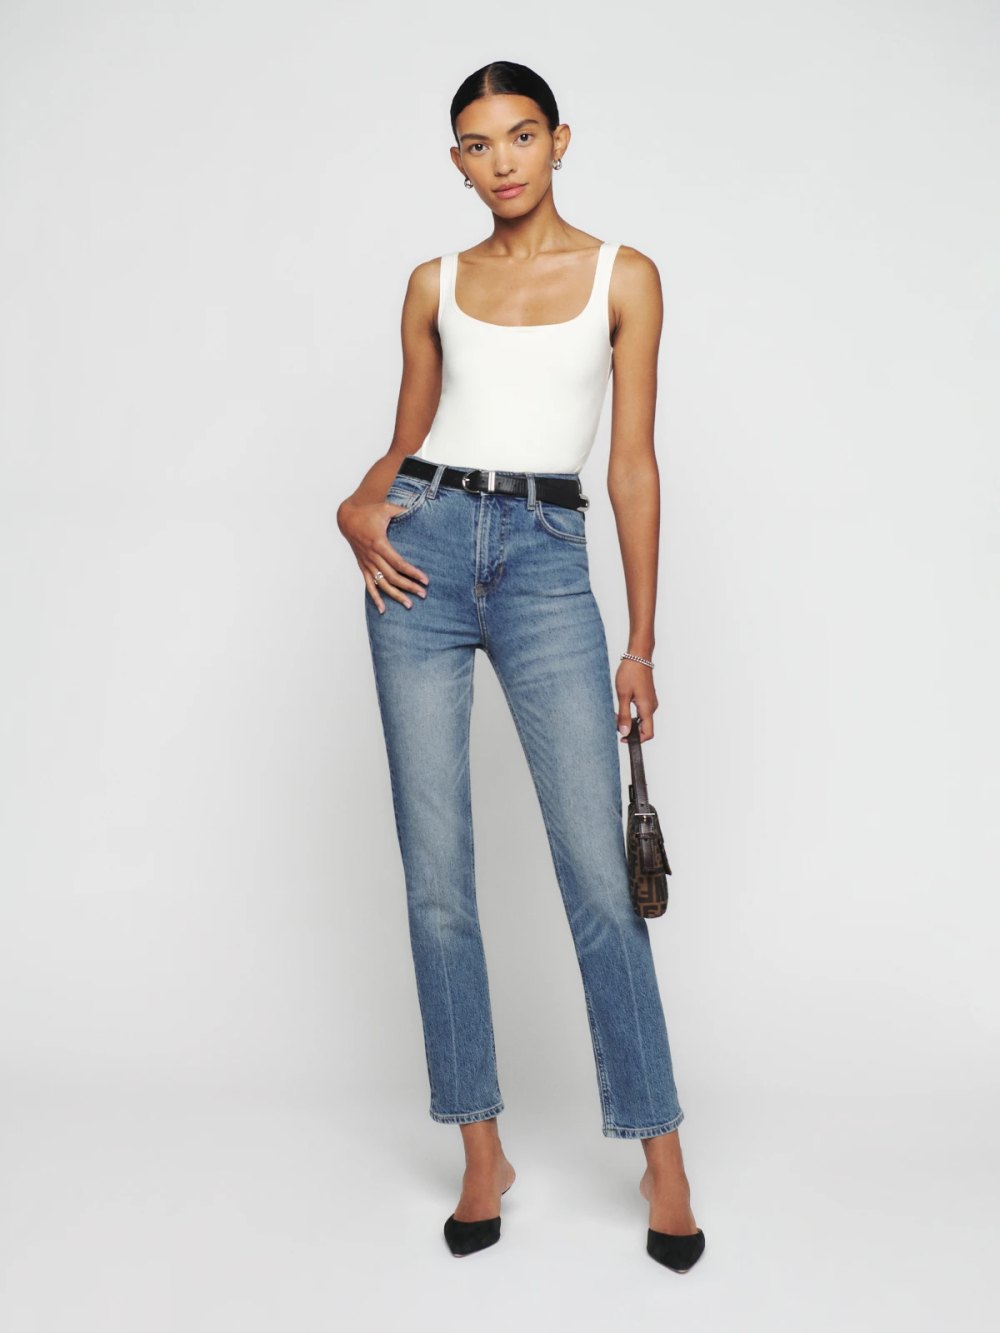 high-rise jeans